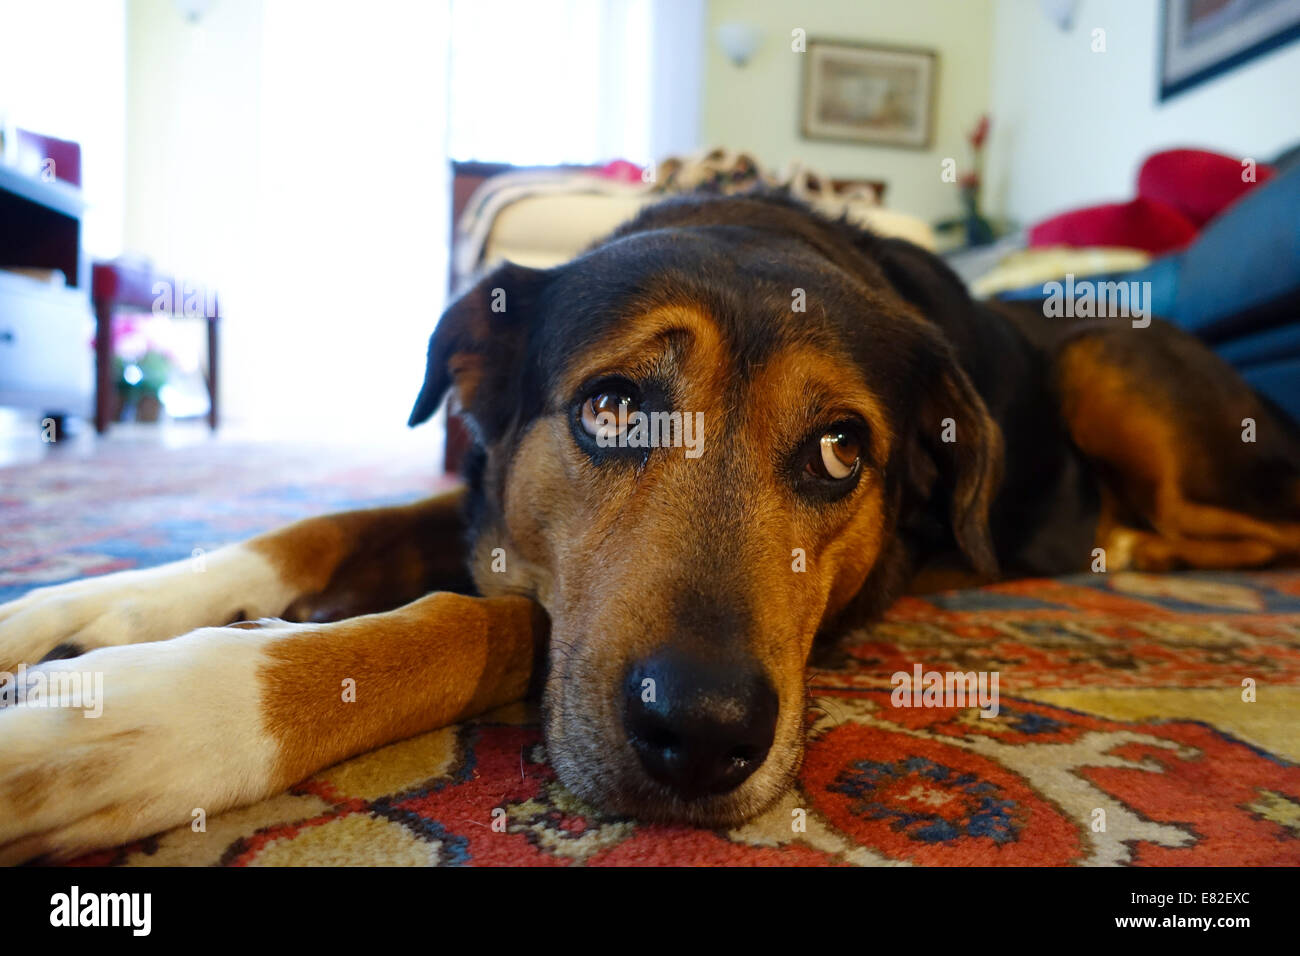 Sad dog laying on the floor in a home with expressive eyes Stock Photo